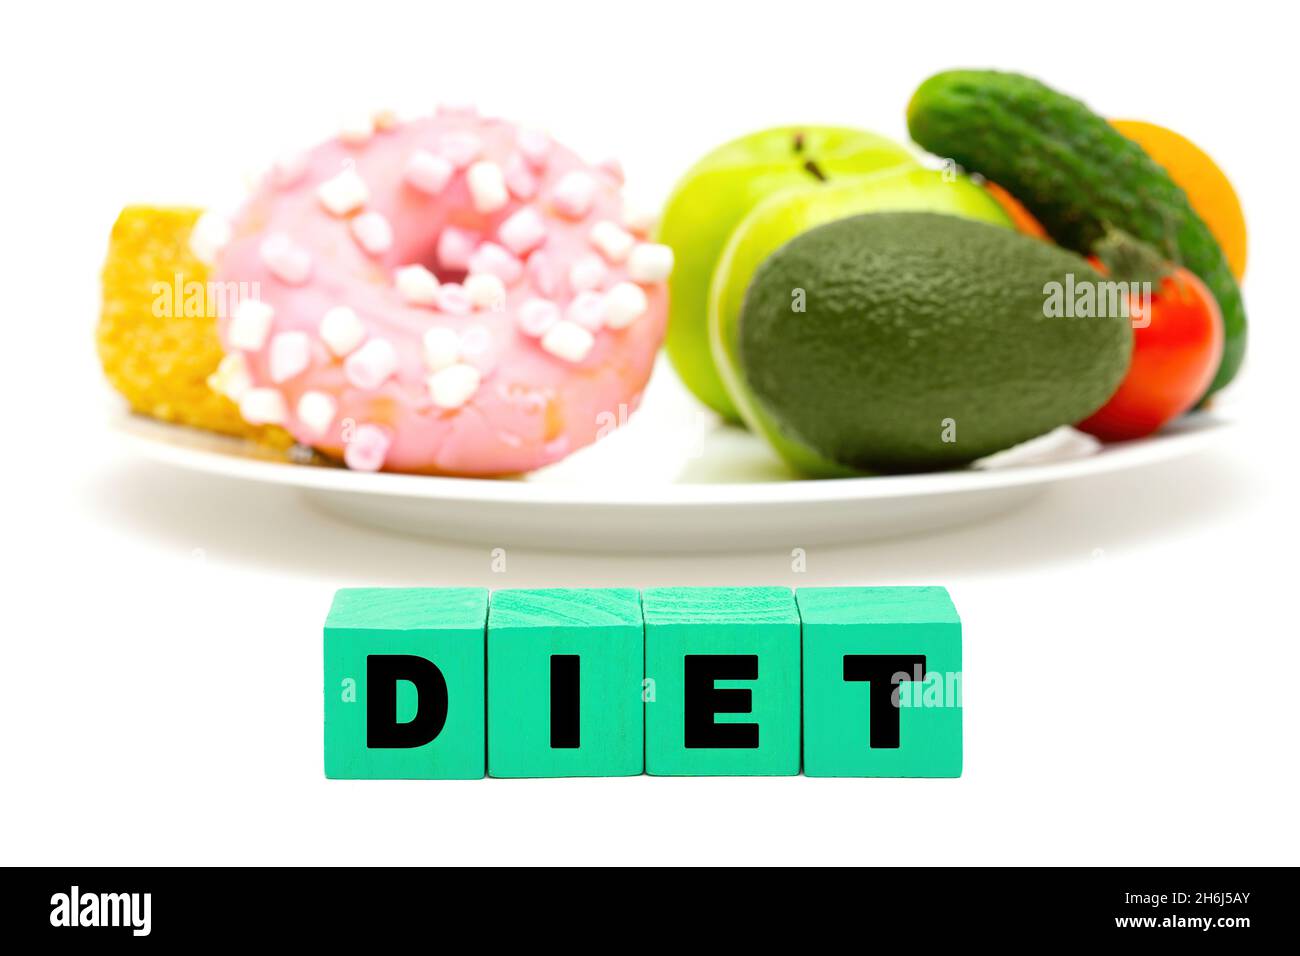 Word DIET made of letter blocks in front of a white plate with sweets, fruits and vegetables. Dieting concept. Stock Photo